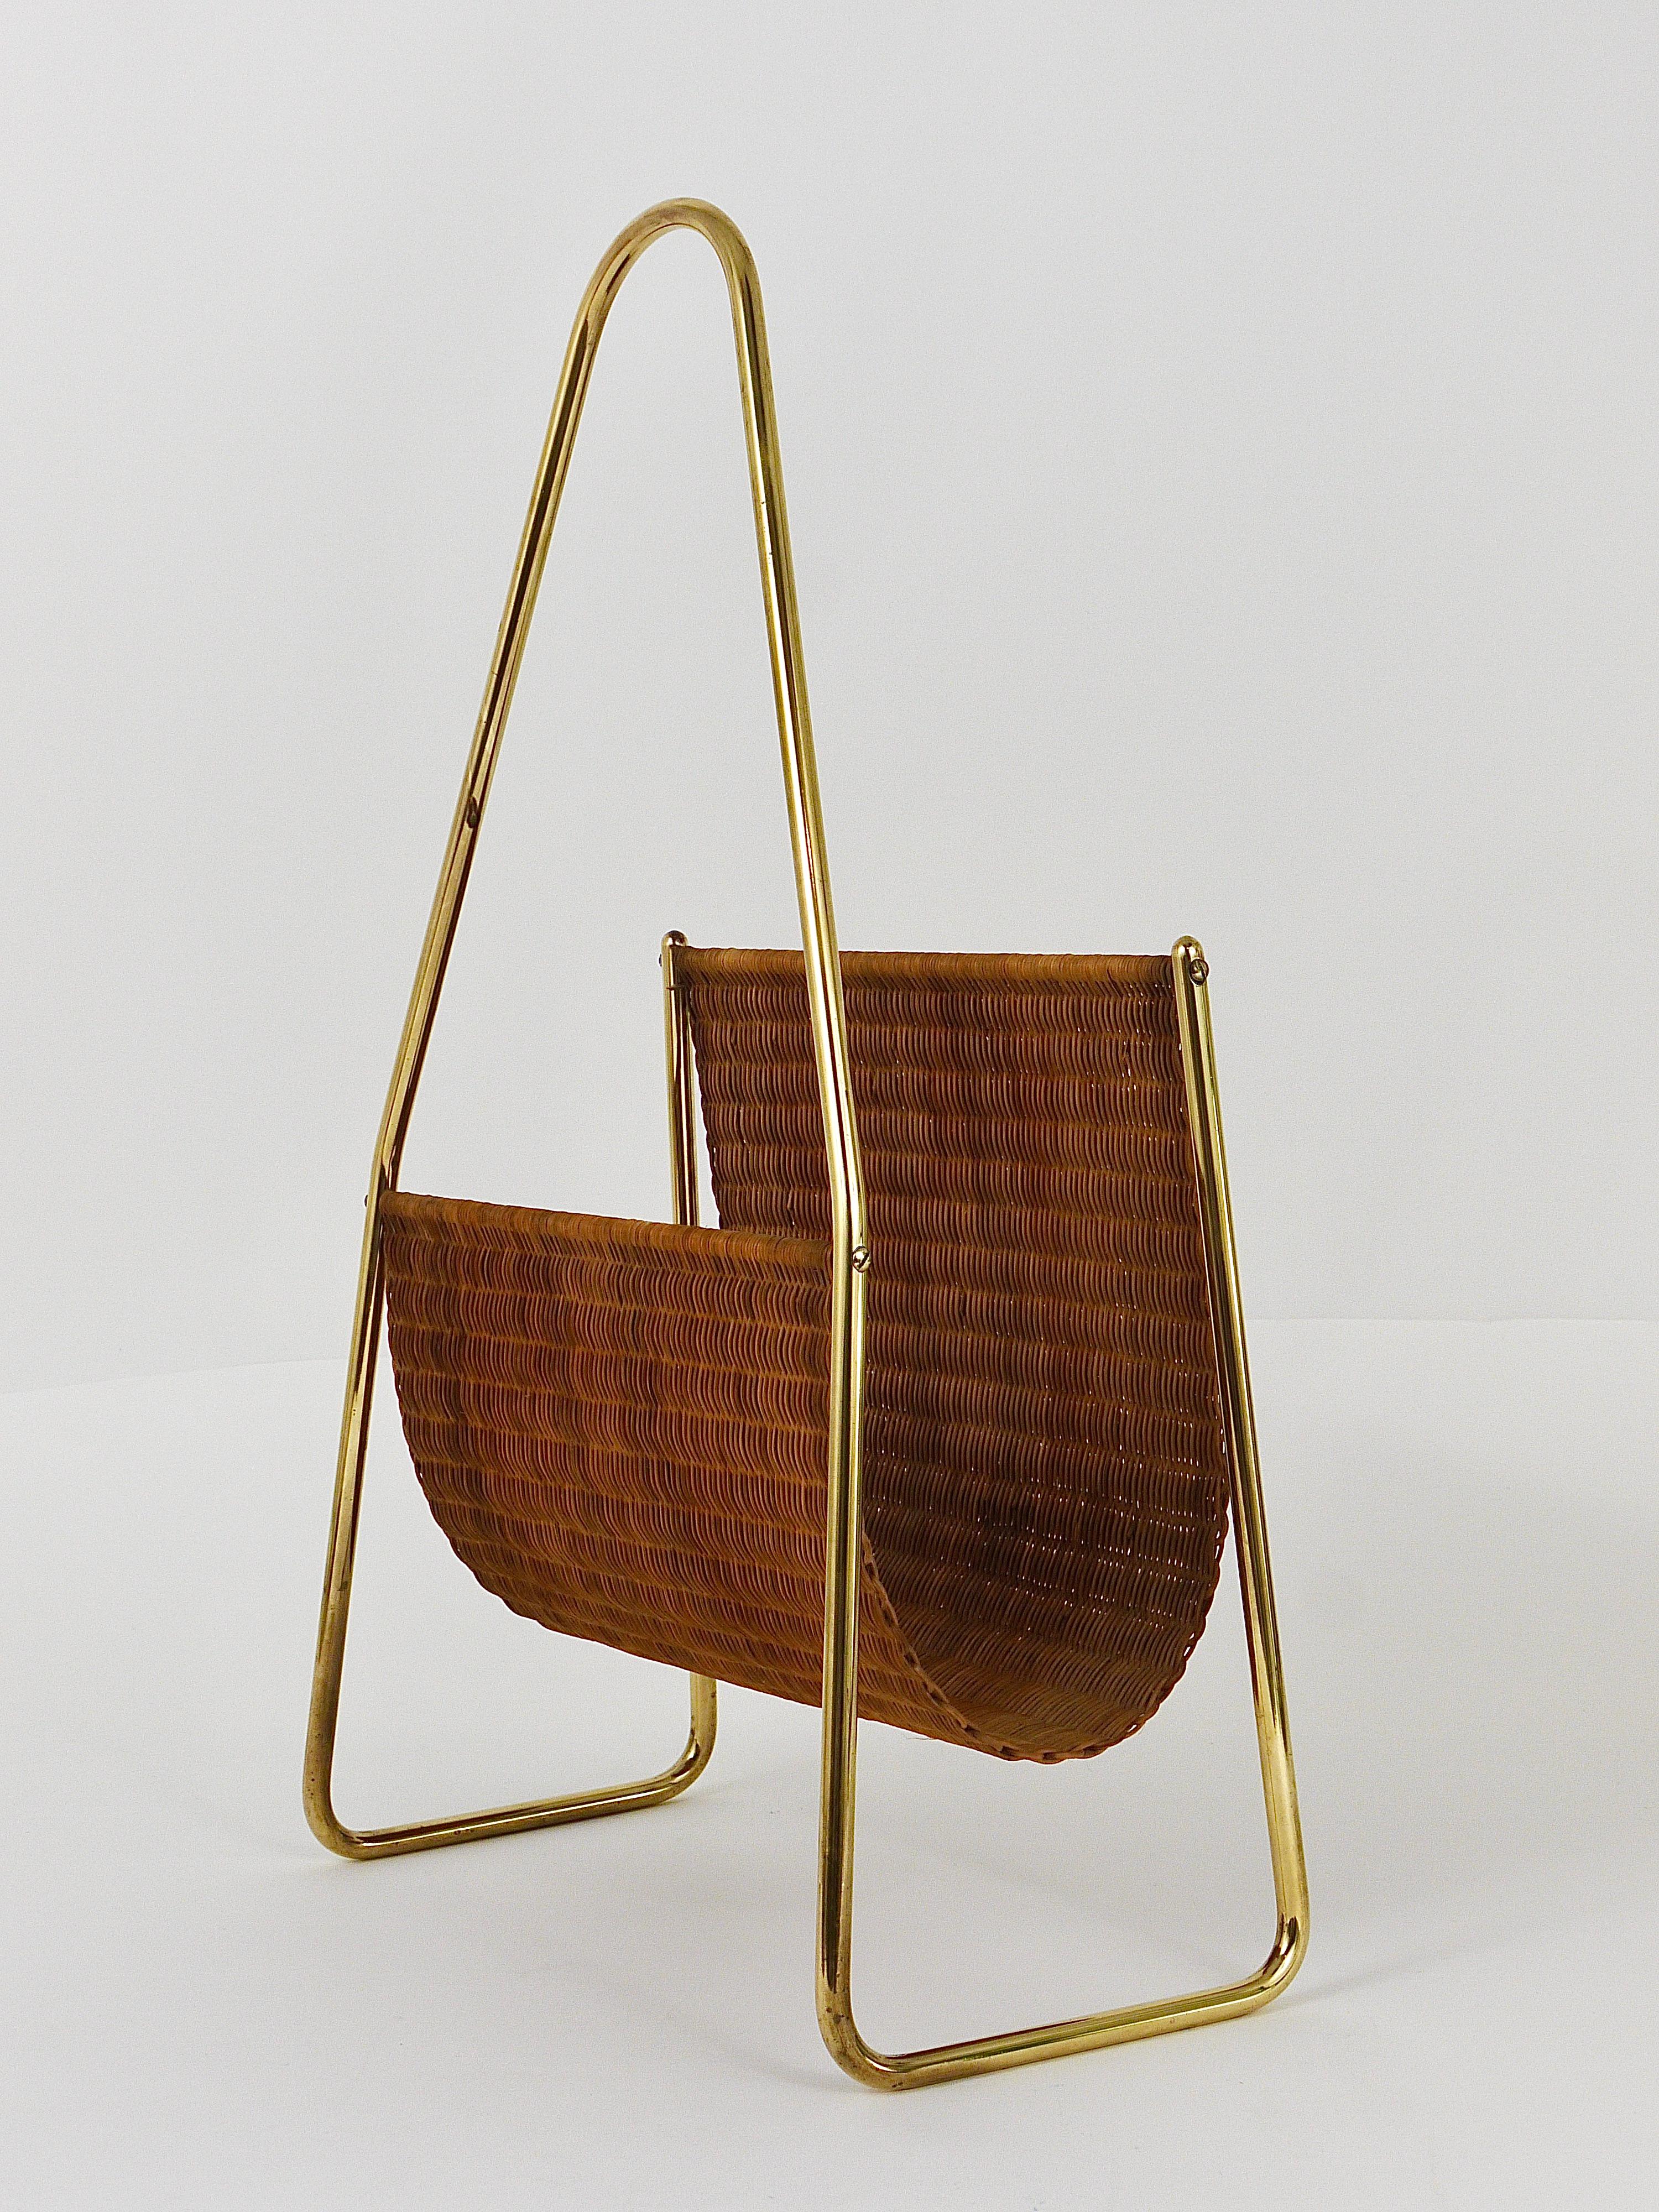 Carl Auböck II Midcentury Magazine Rack, Brass and Woven Cane, Vintage, Austria In Good Condition For Sale In Vienna, AT